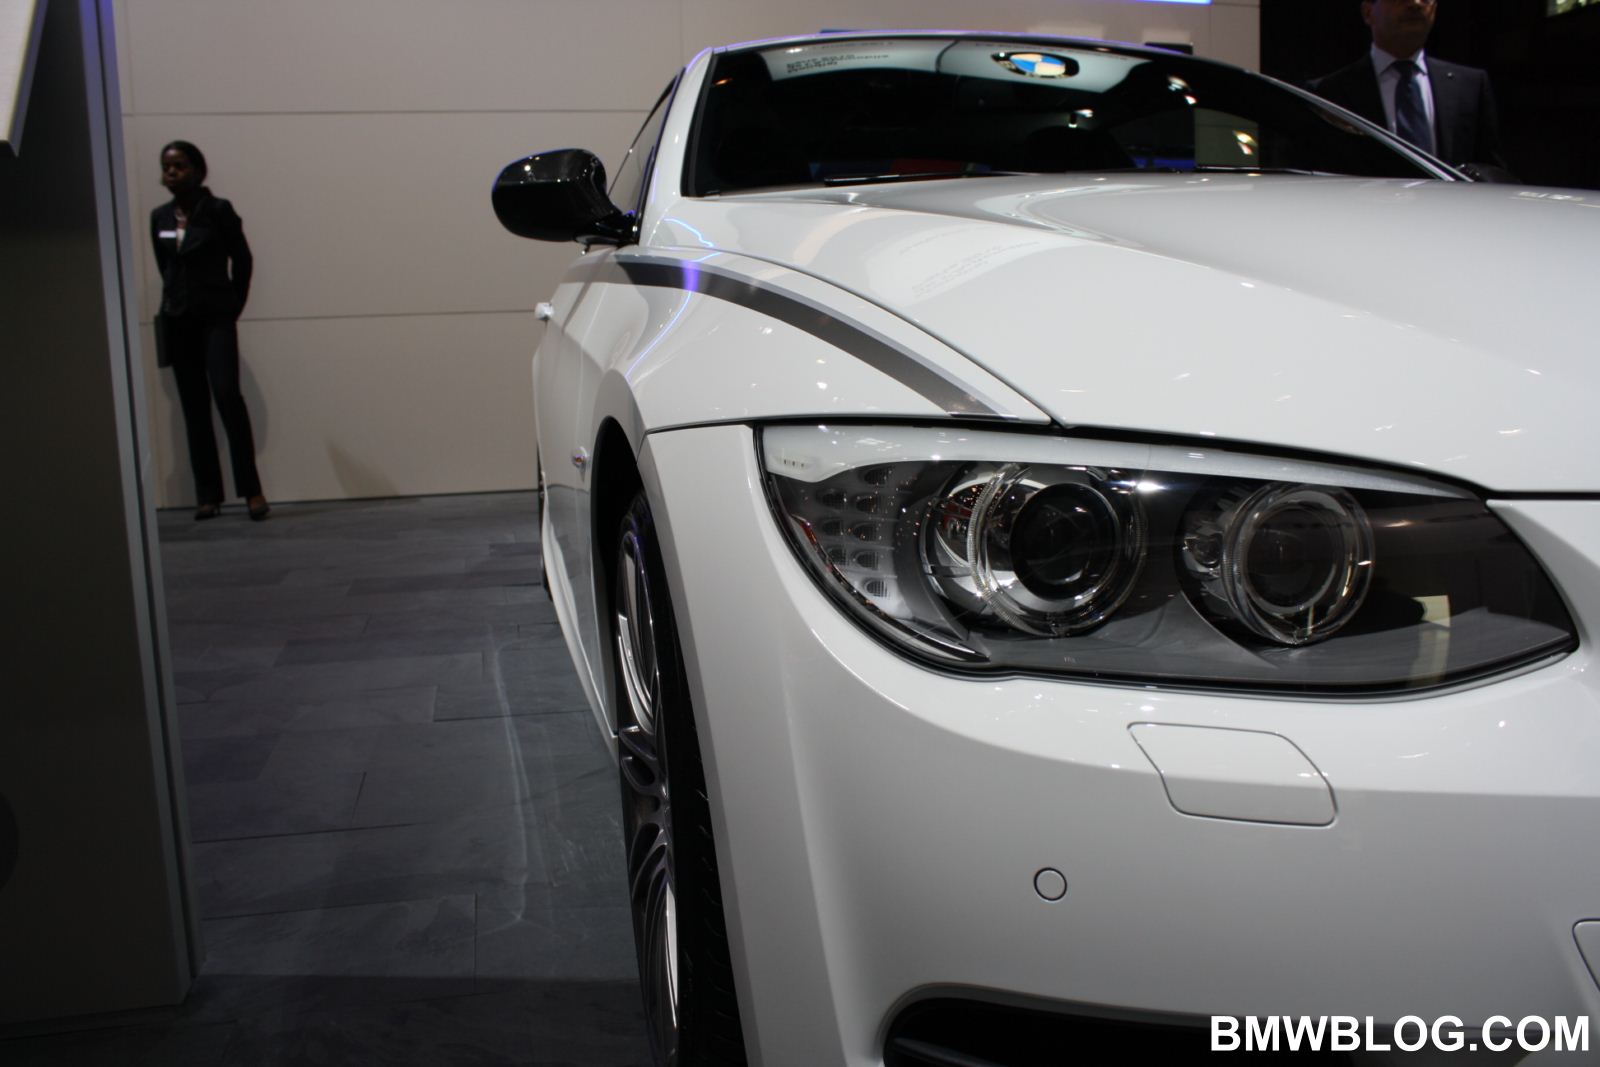 Video: BMW 335i M Performance Parts at the Paris Motor Show